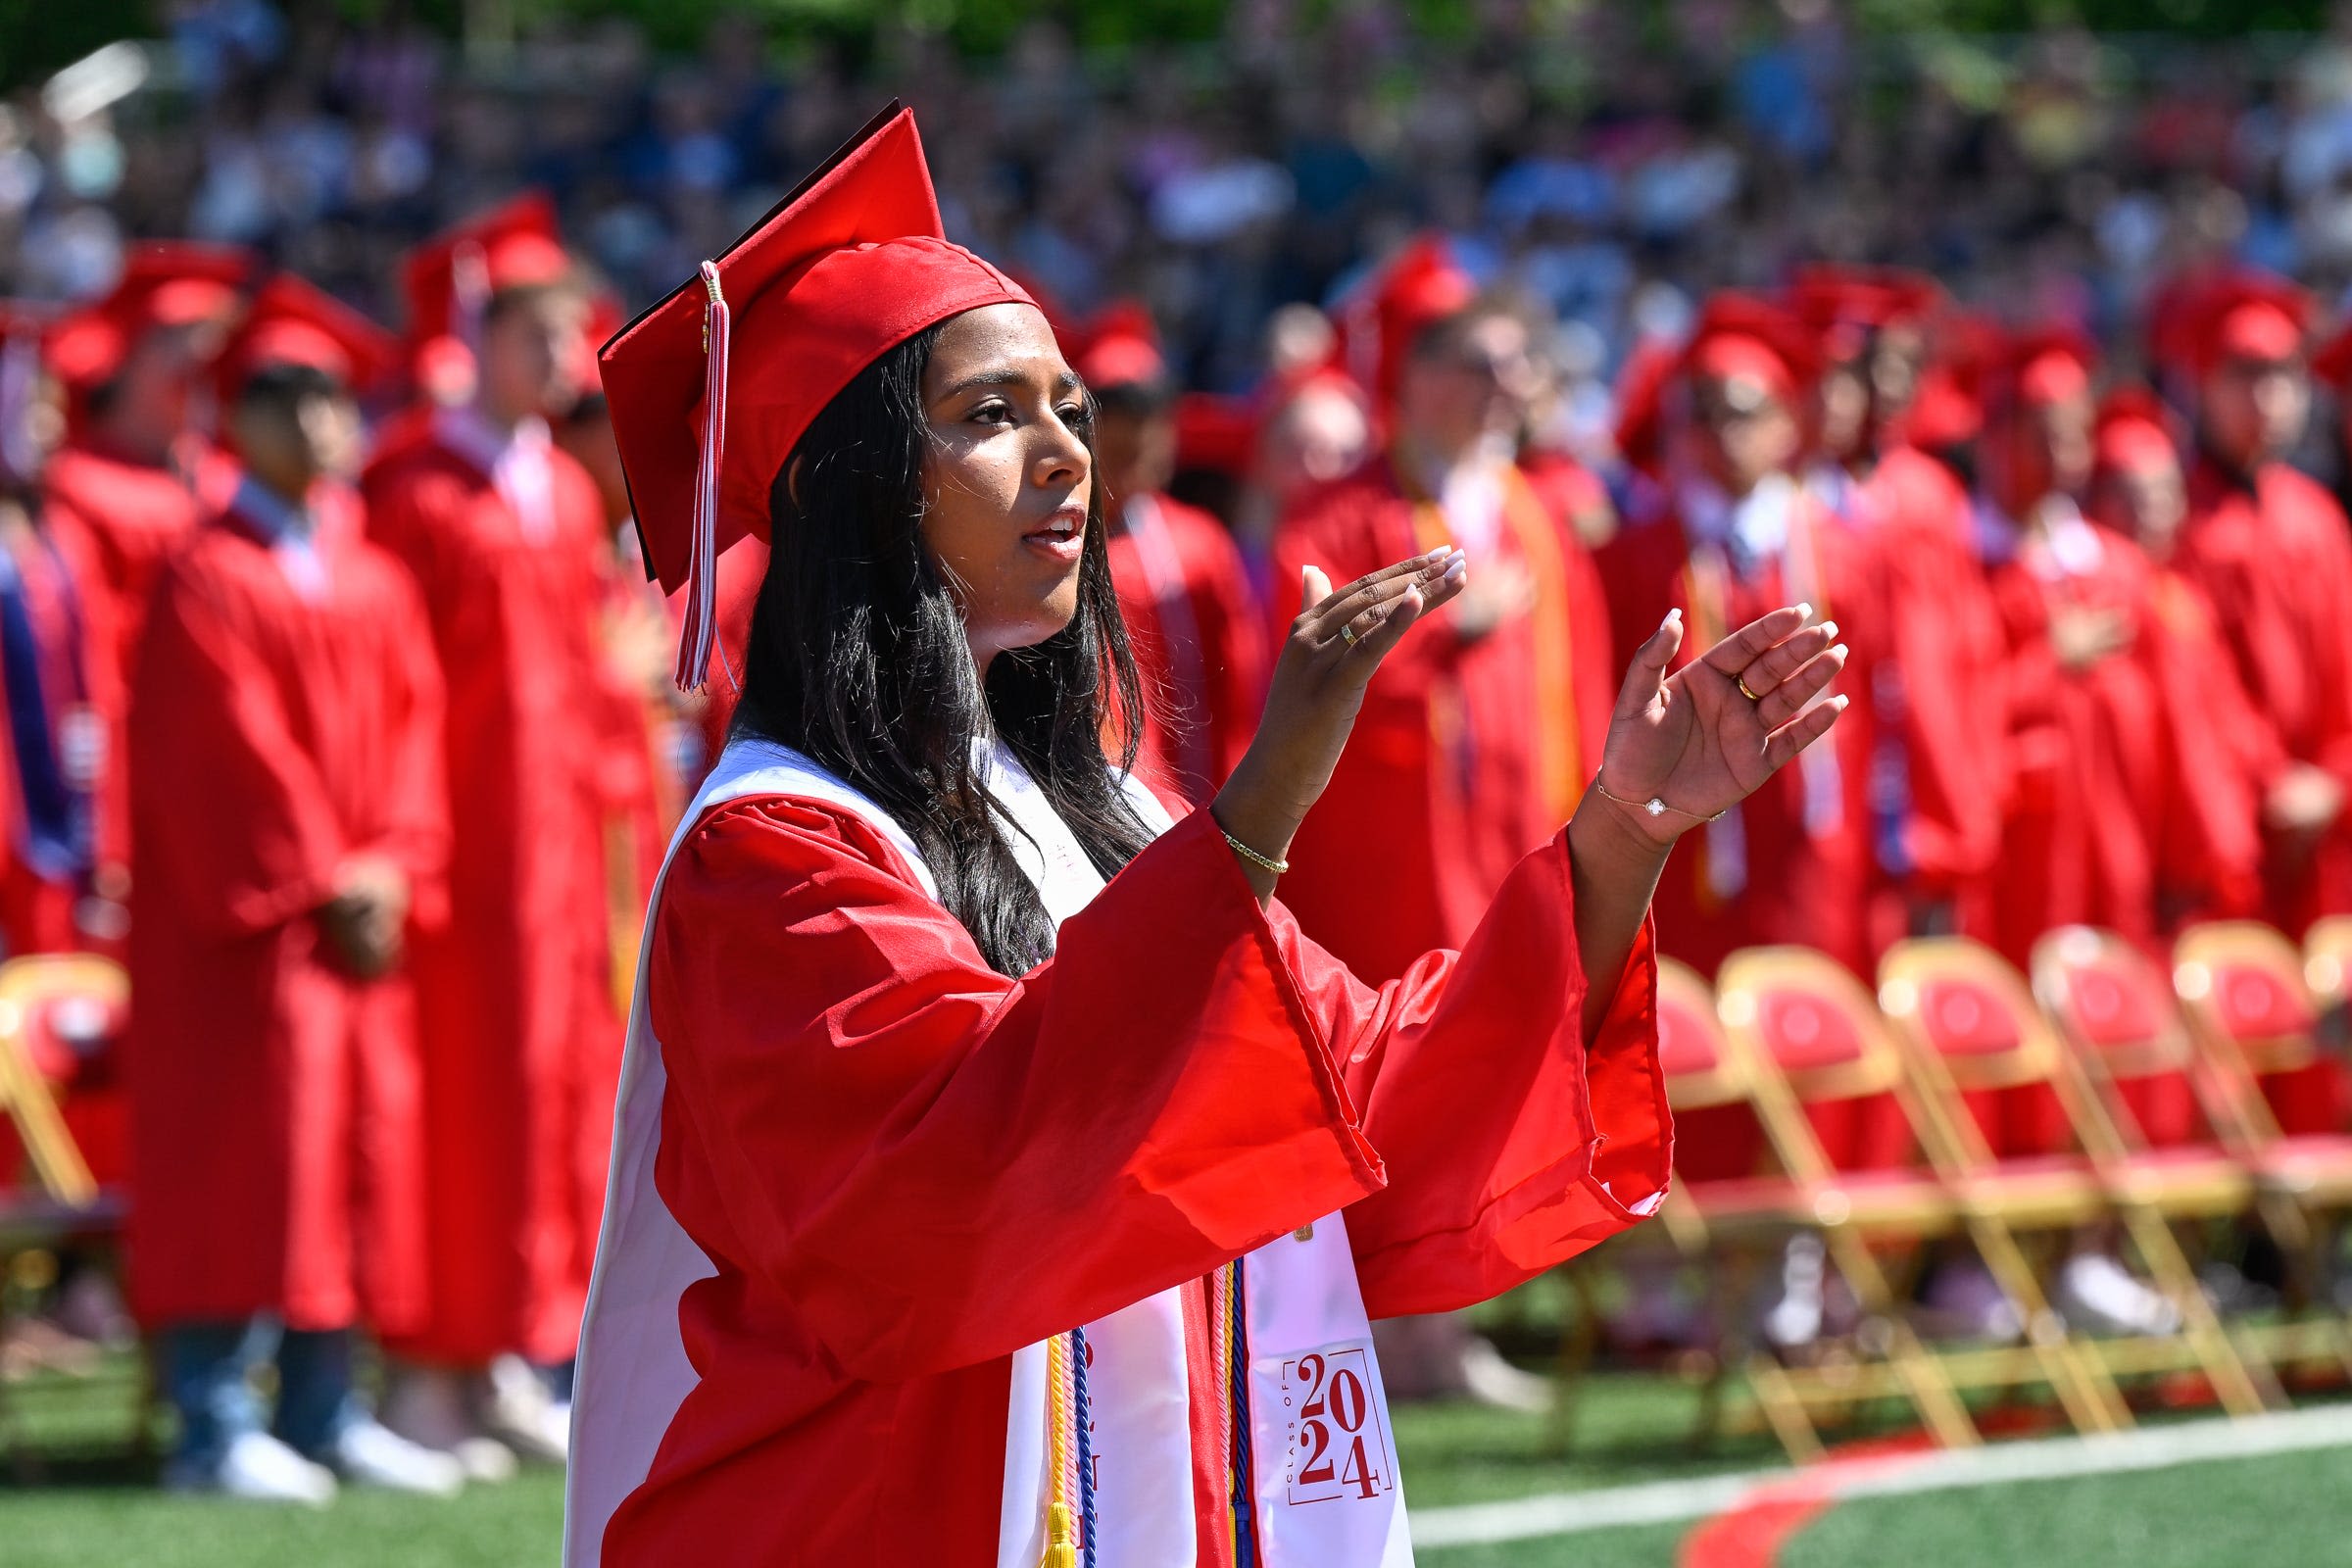 Milford High School graduates urged to pursue 'an infinite number of opportunities'